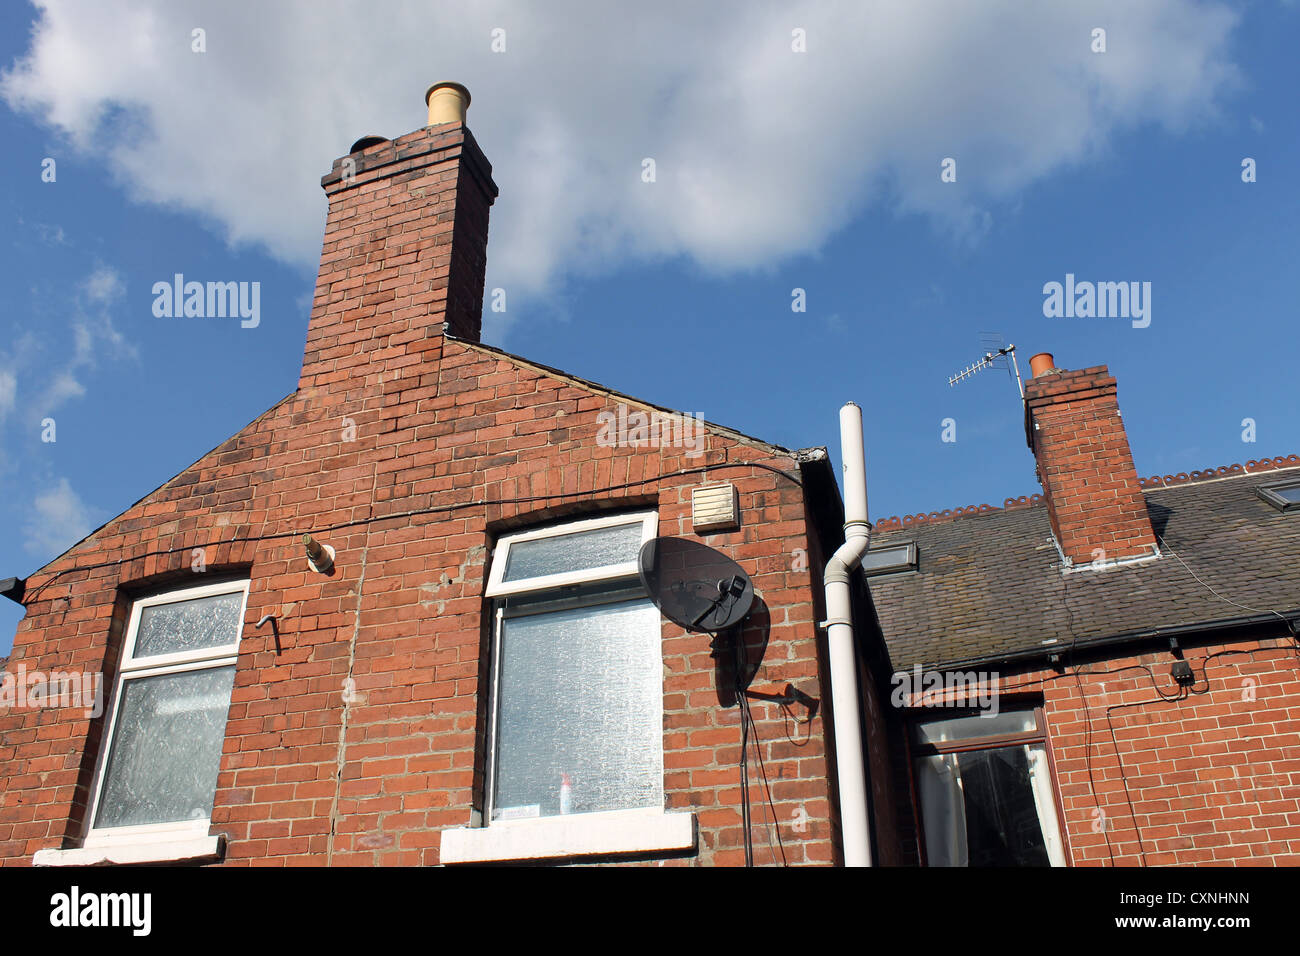 Old brick house or home with chimney and satellite dish, blue sky and cloudscape background. Stock Photo